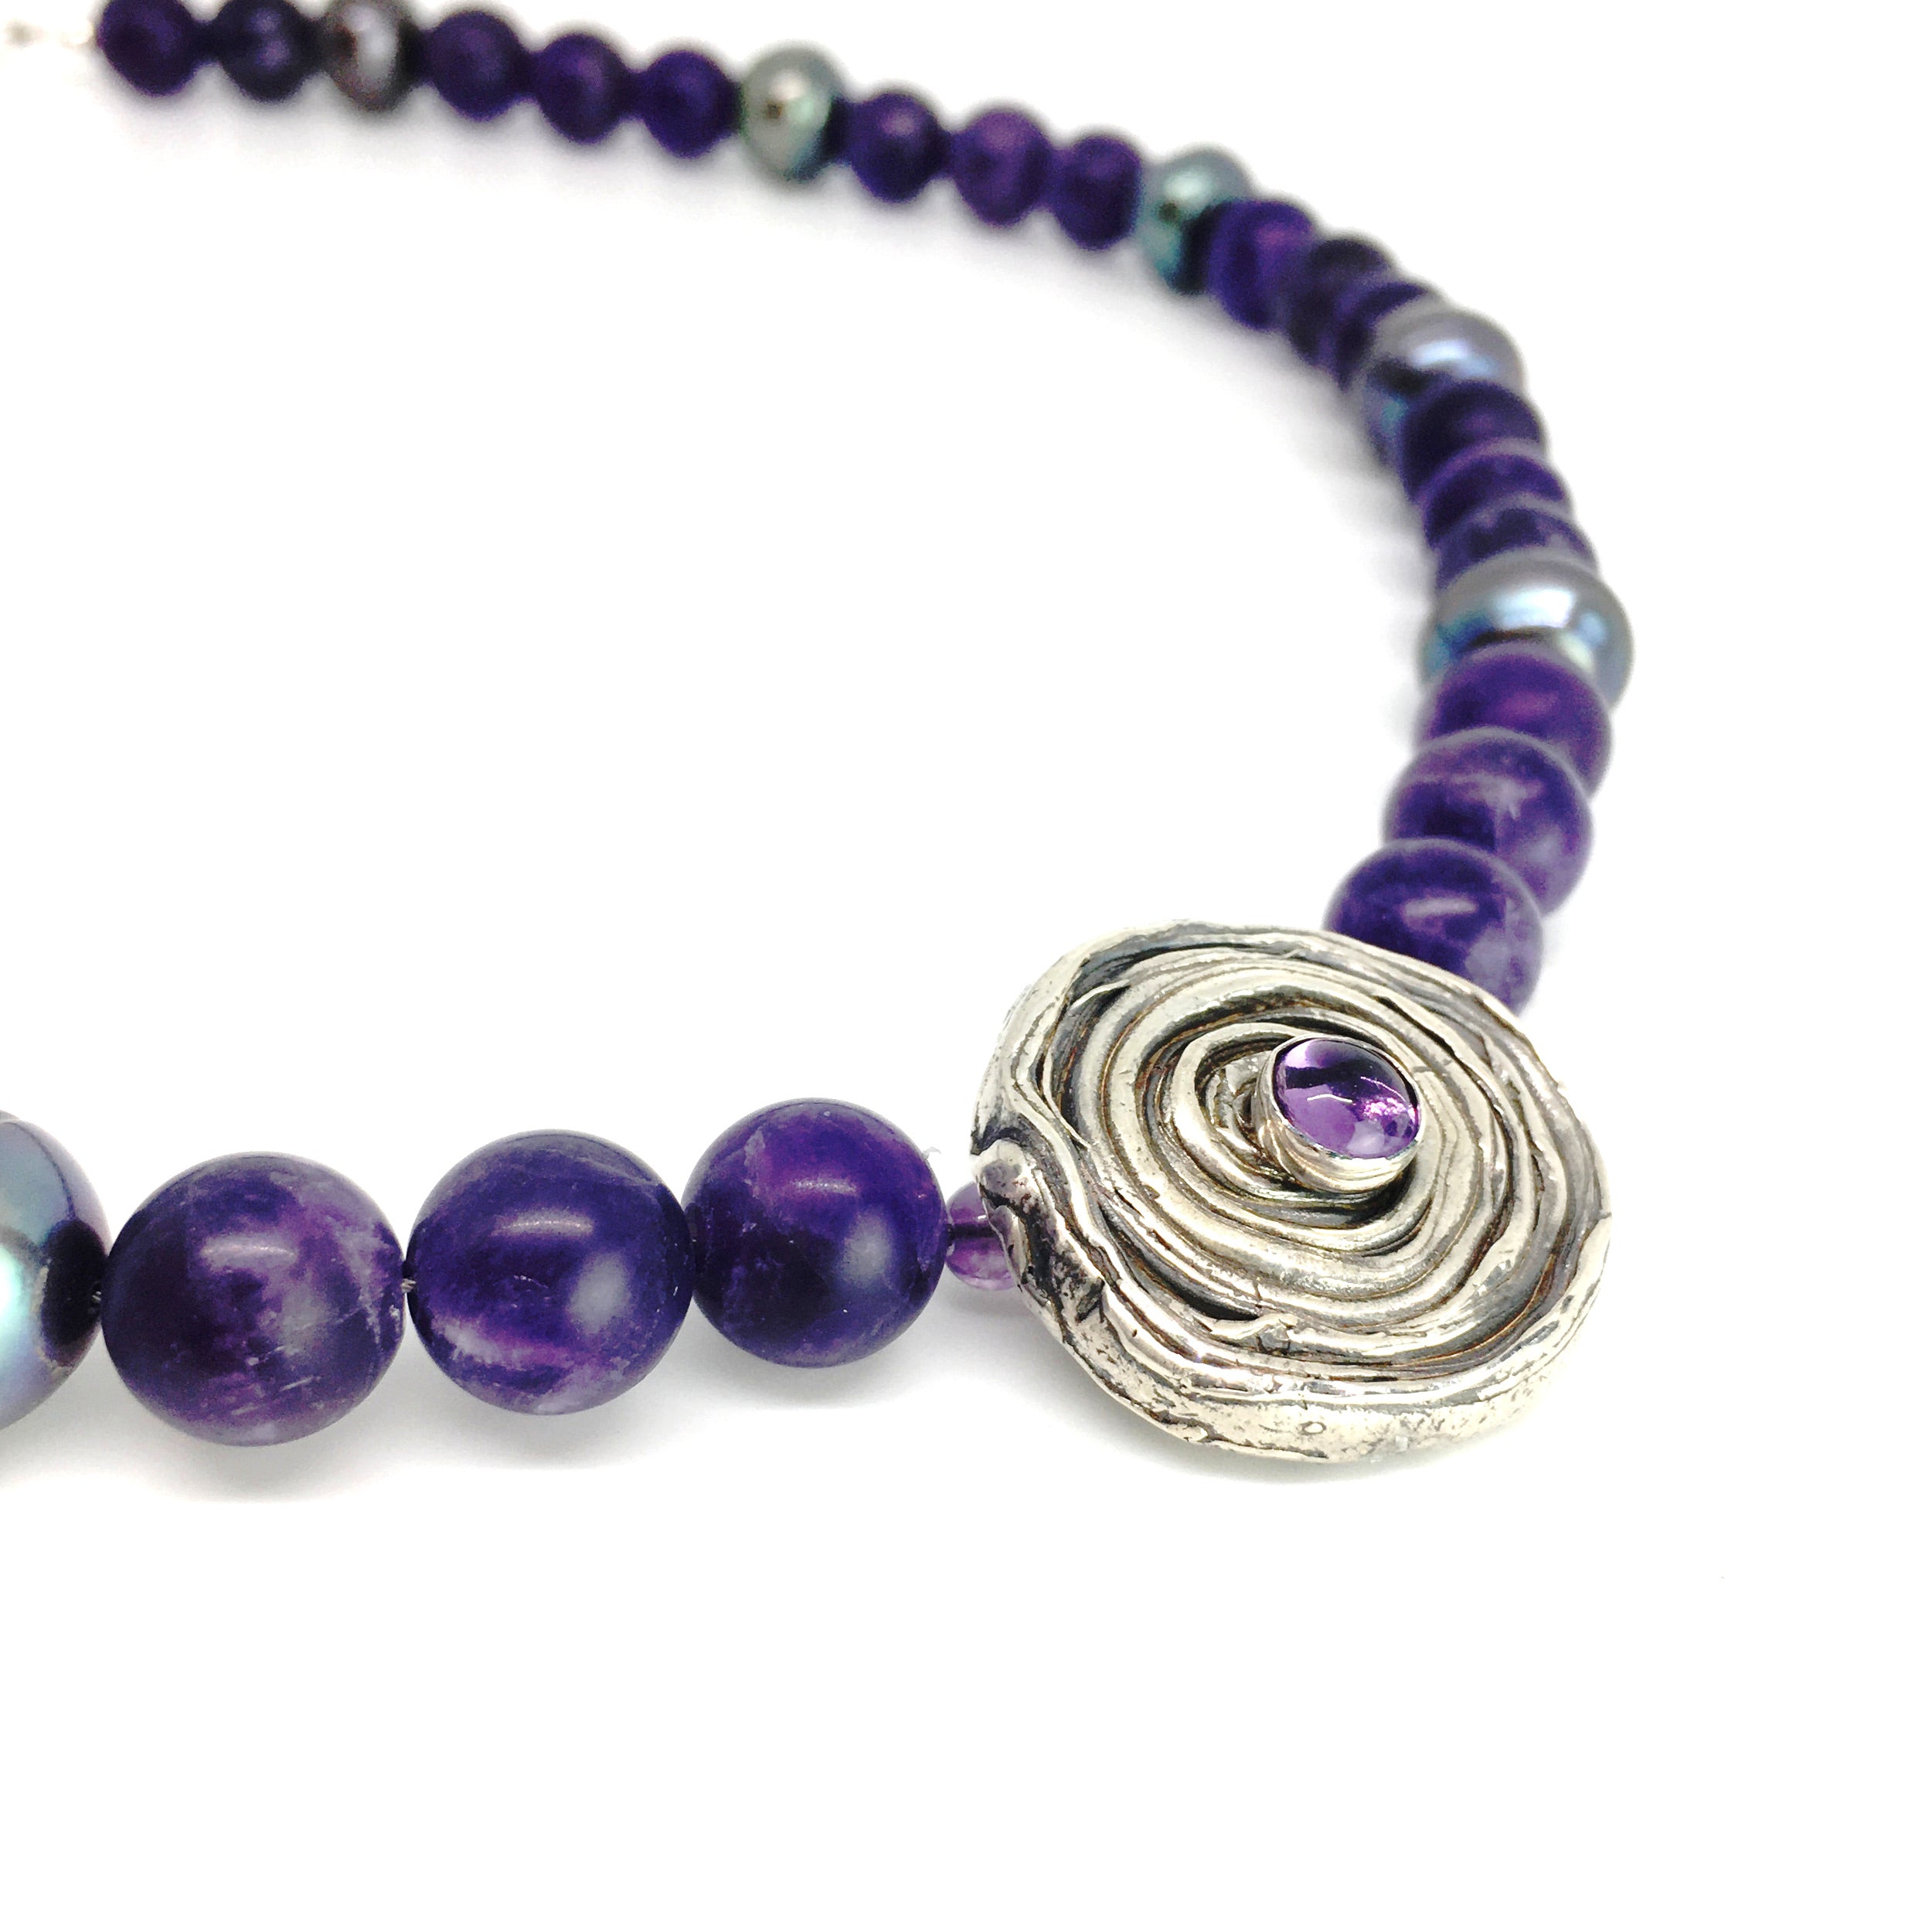 Mitsuro Hikime Rose Pendant Necklace with Amethyst and Baroque Peacock Pearl